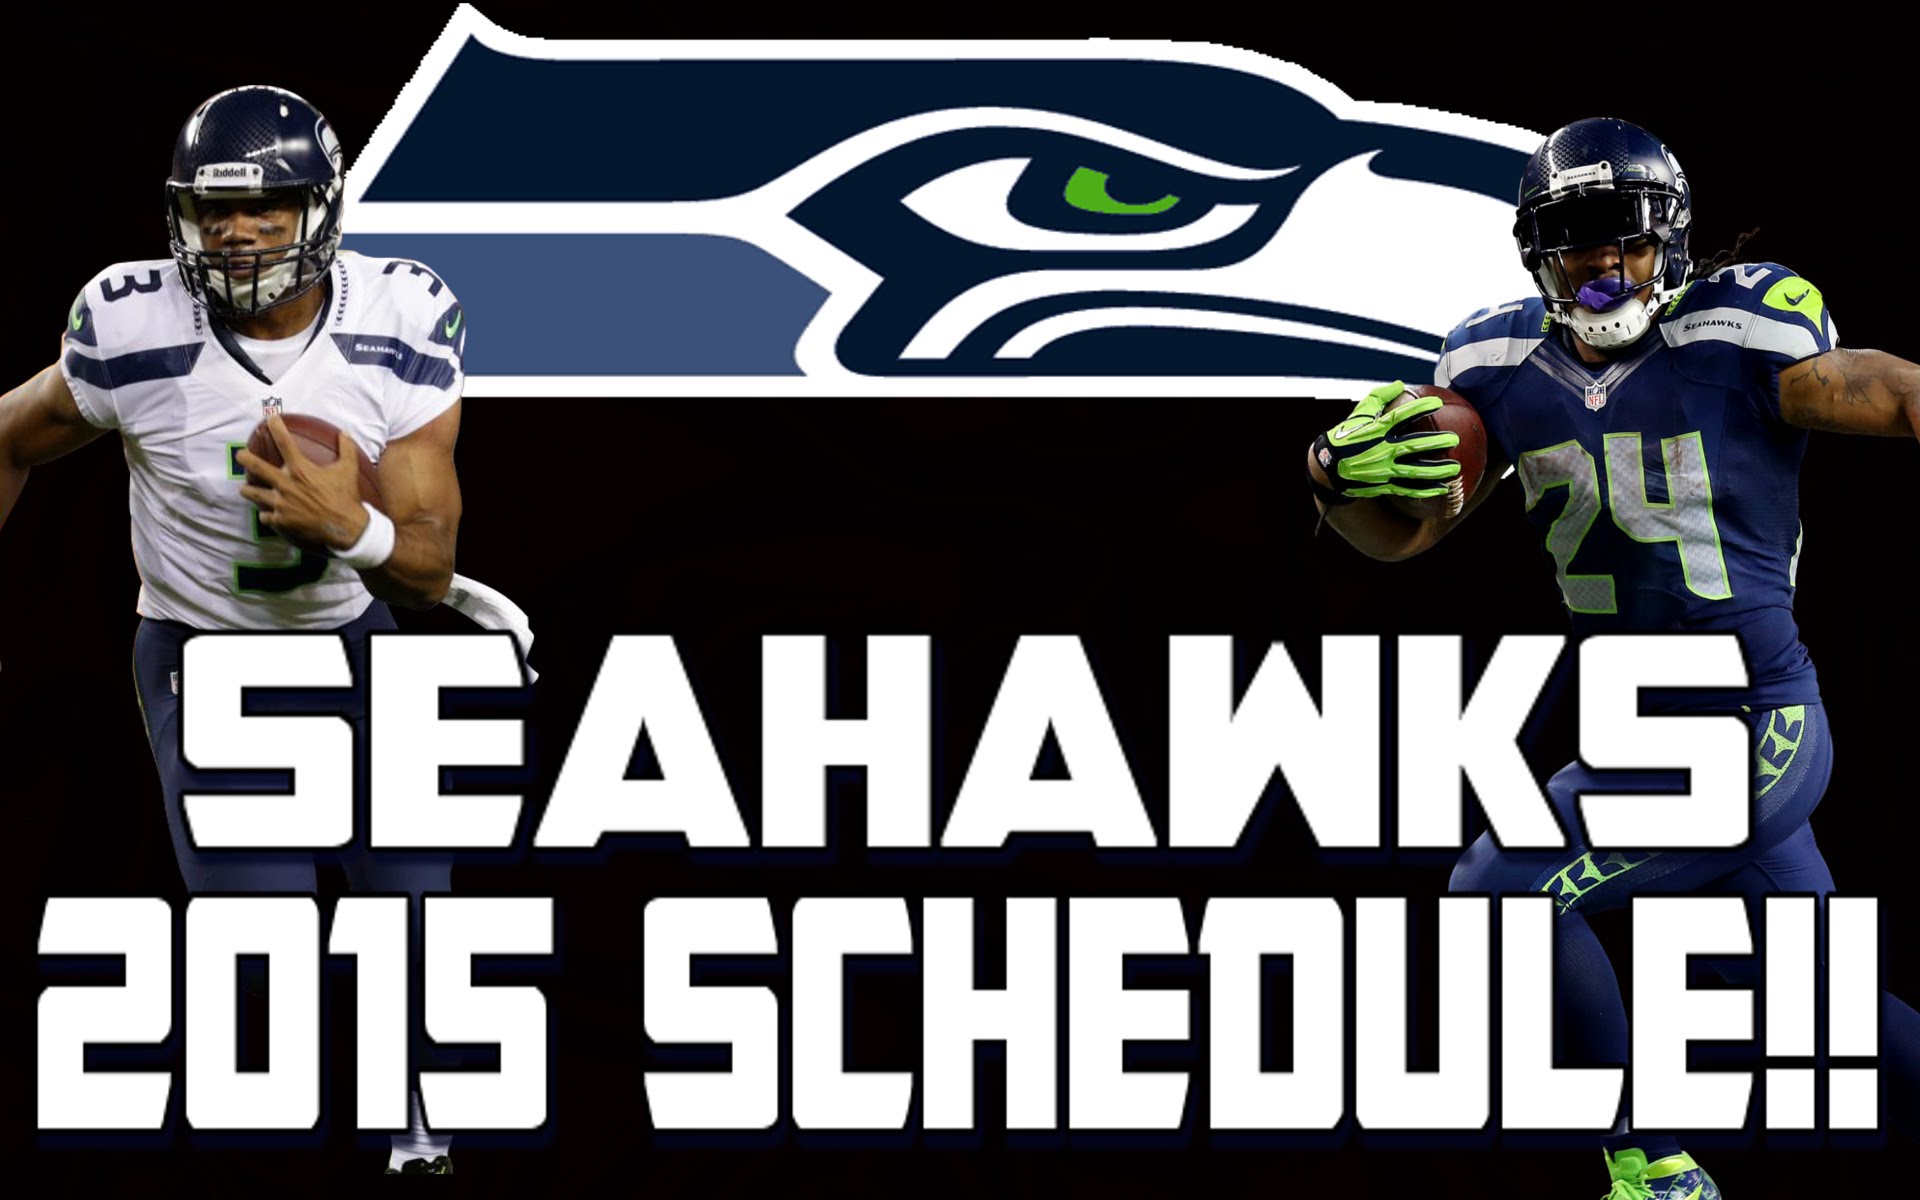 Seahawks 2015 Schedule!! (HYPED!!) - YouTube